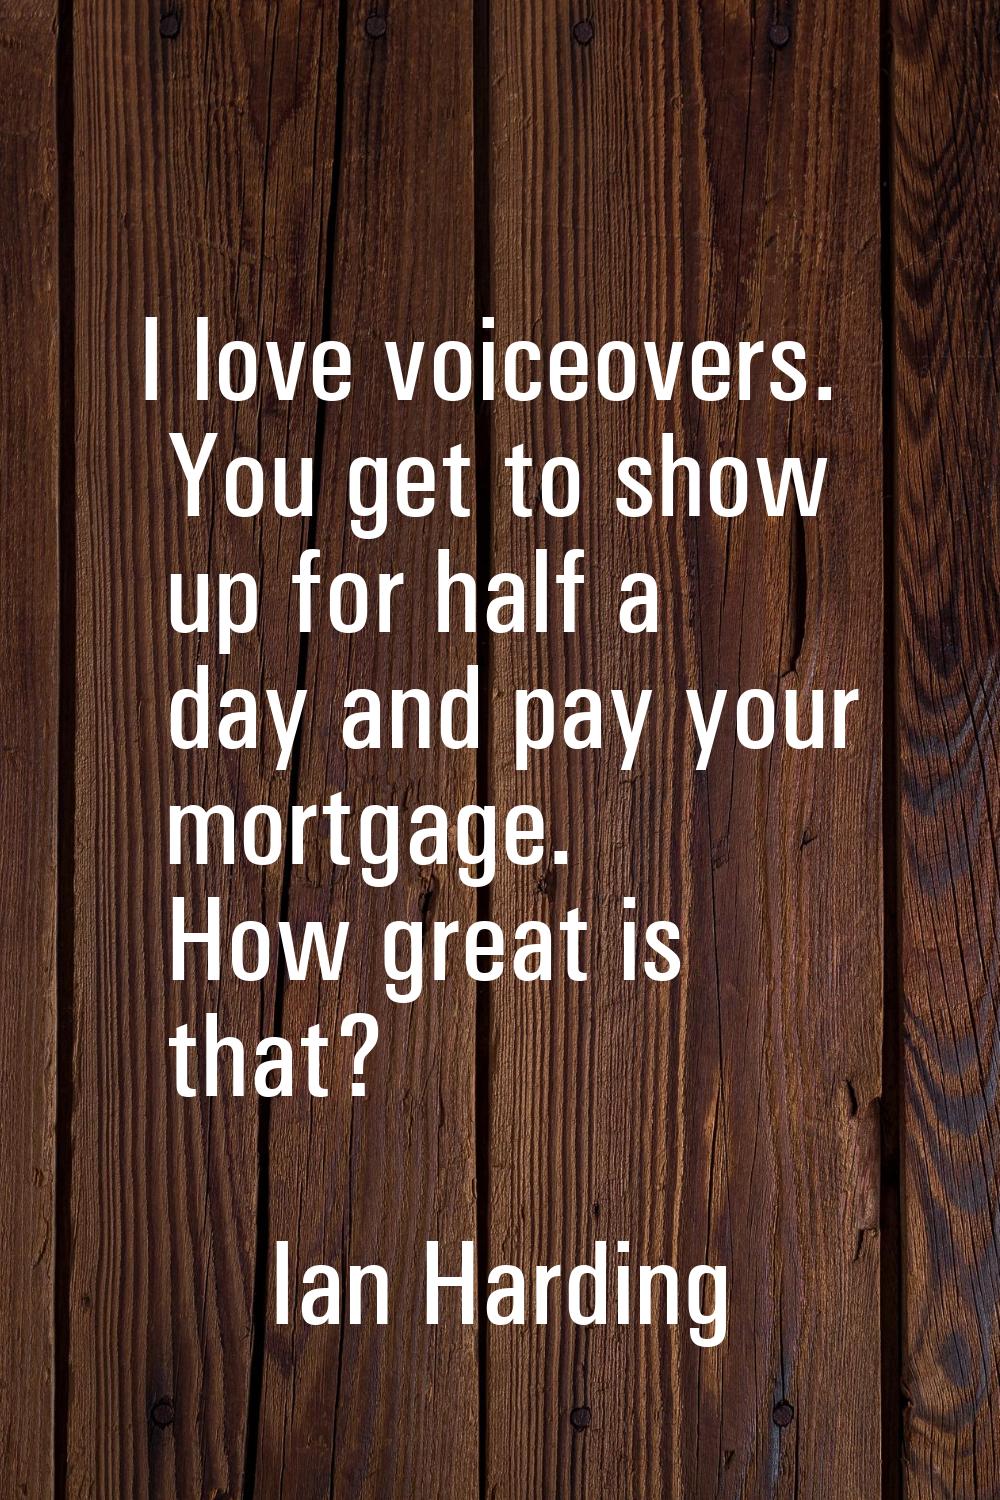 I love voiceovers. You get to show up for half a day and pay your mortgage. How great is that?